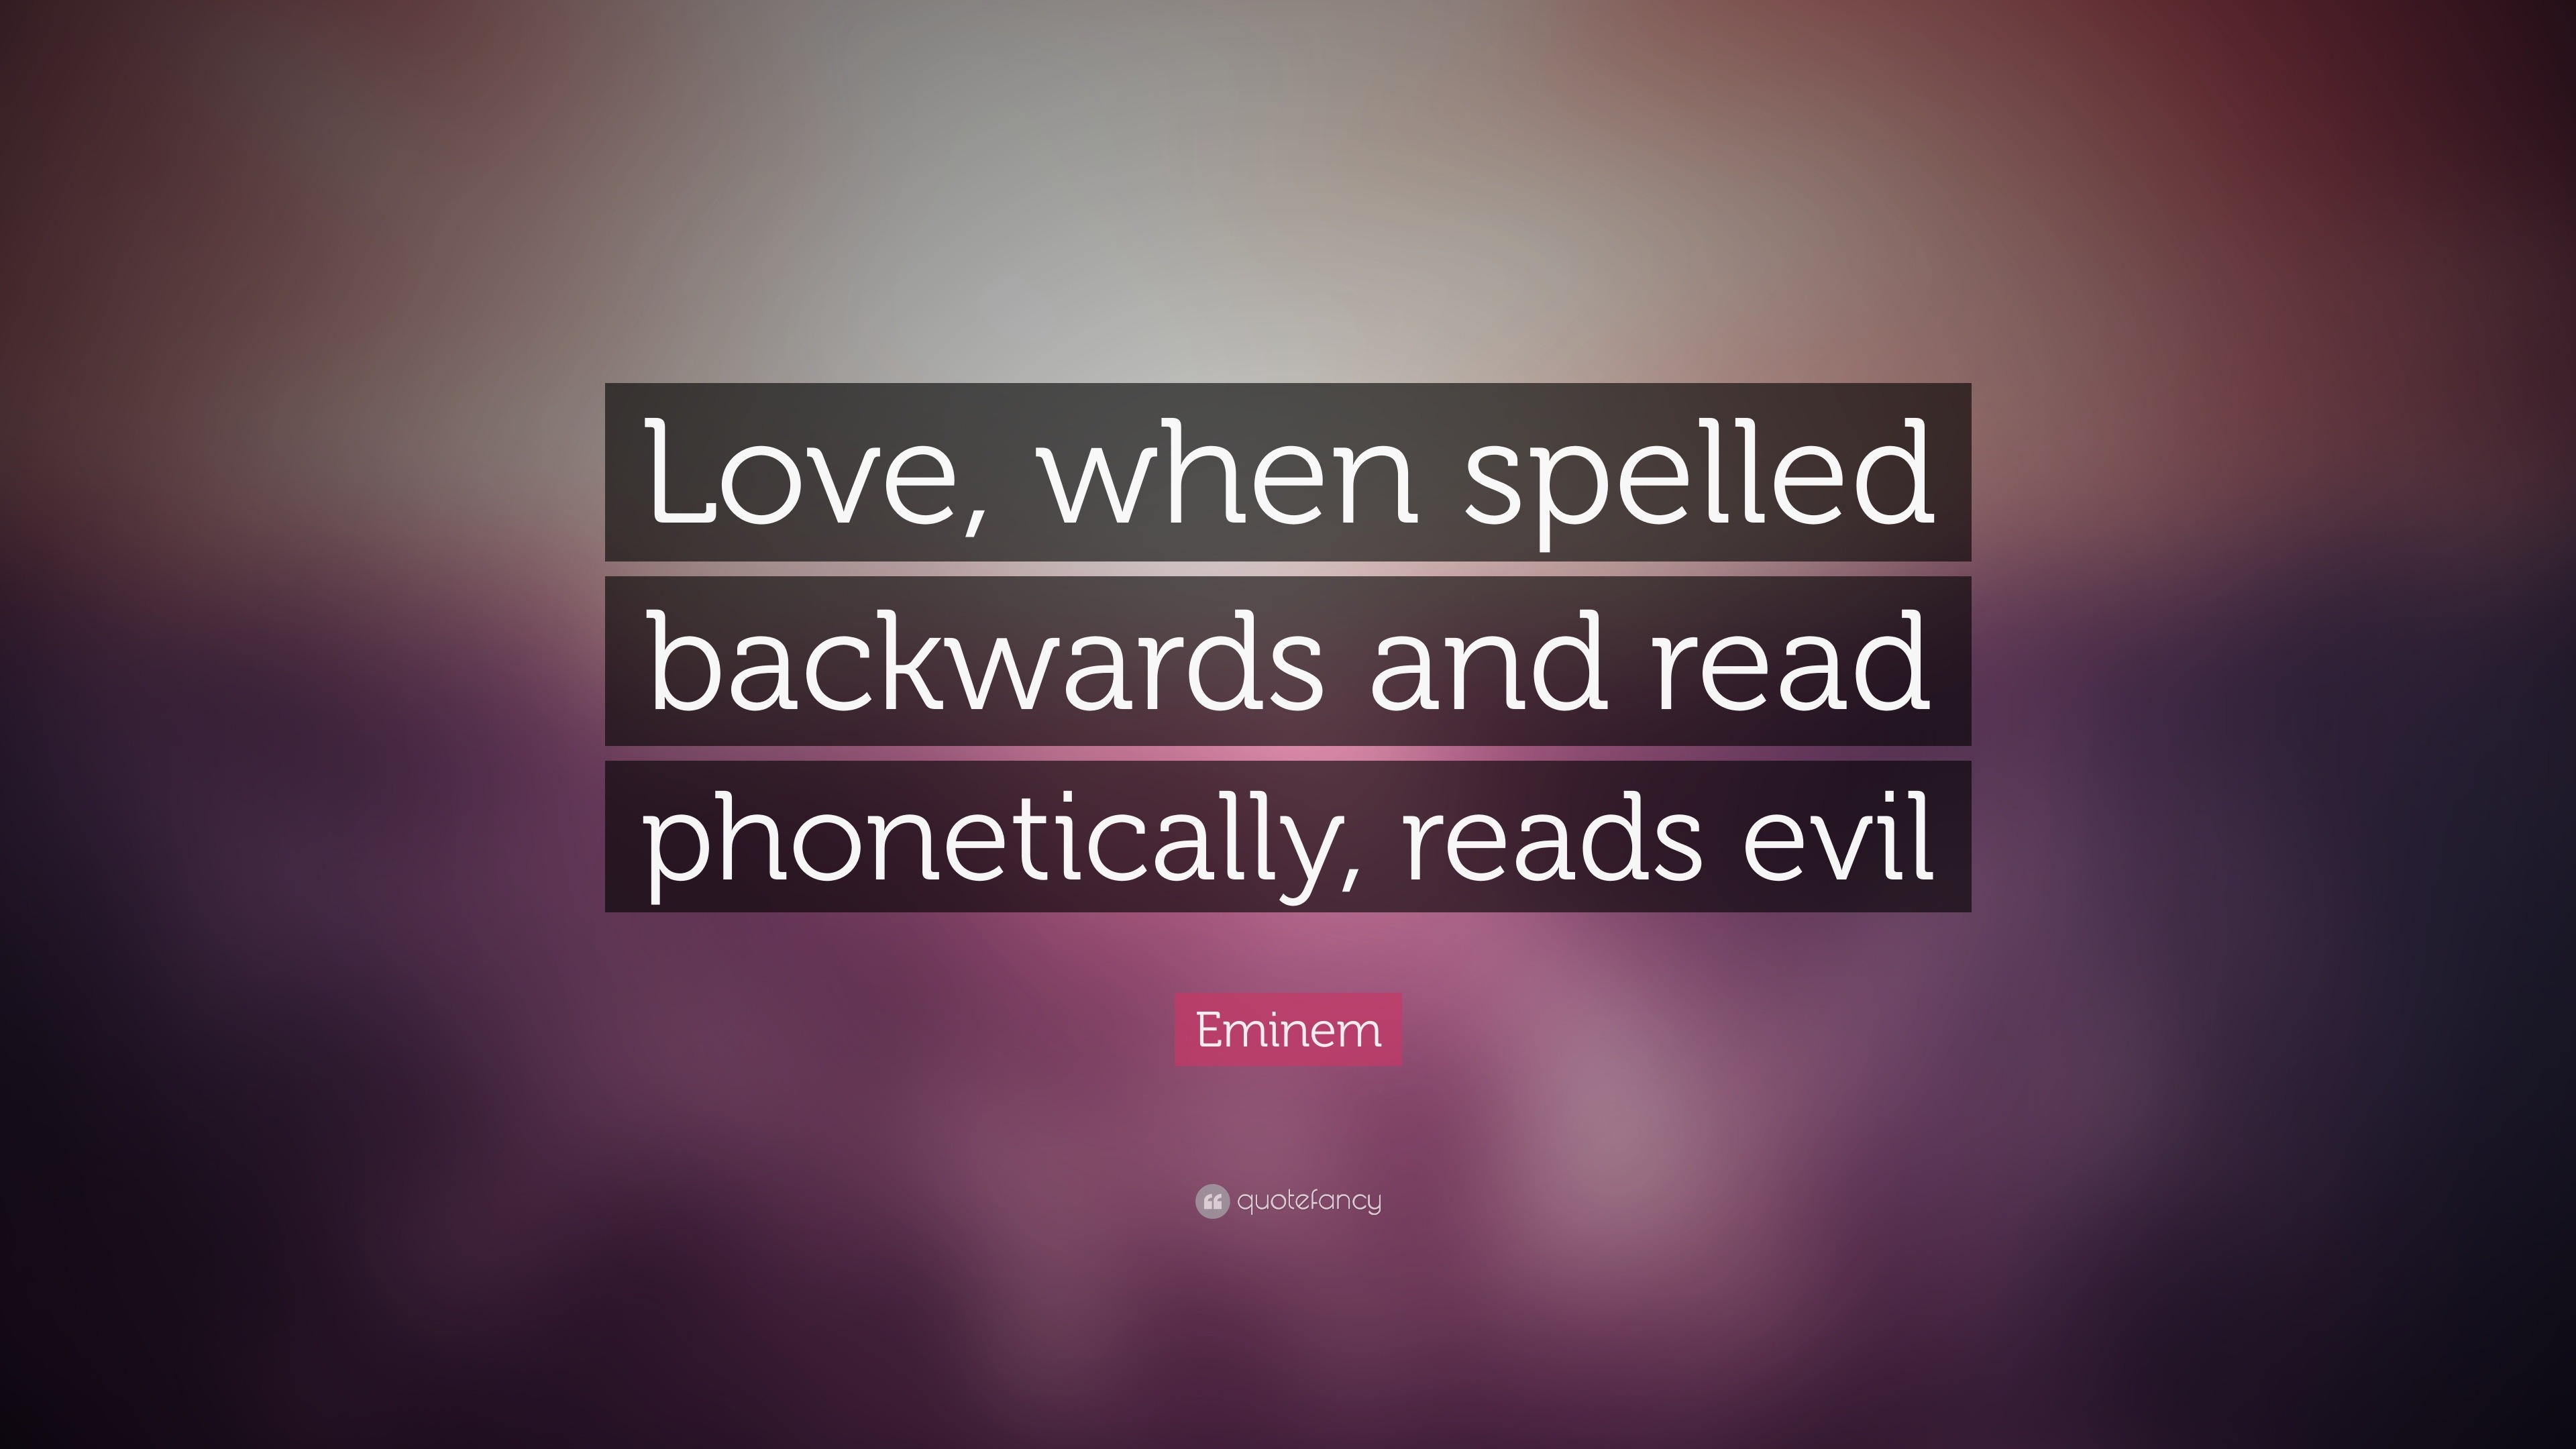 Eminem Quote “Love when spelled backwards and read phonetically reads evil”